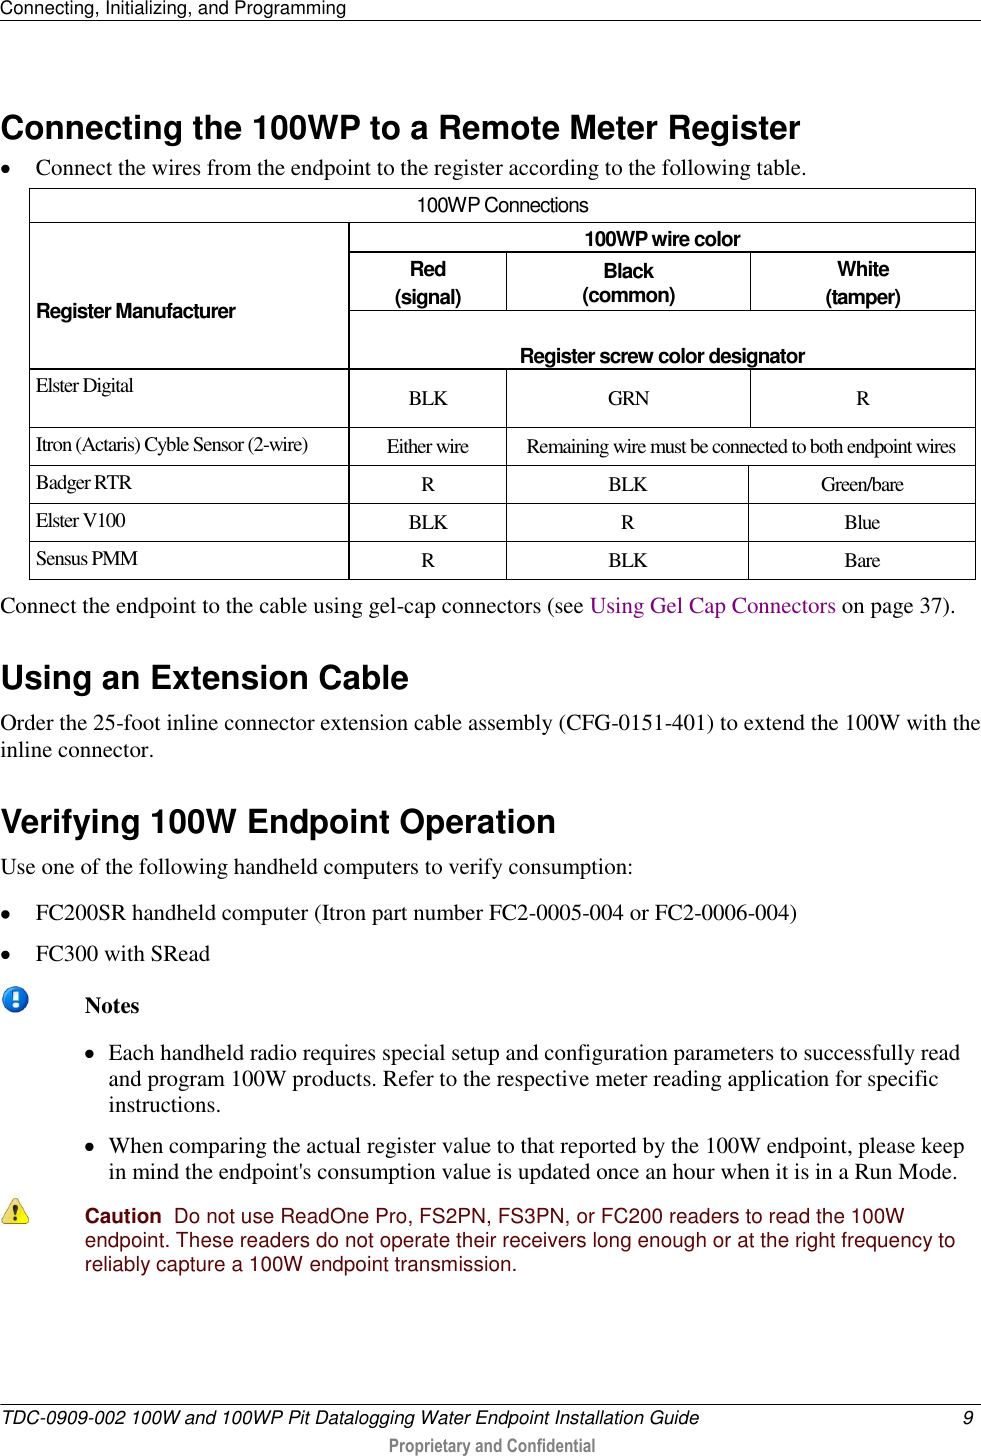 Connecting, Initializing, and Programming   TDC-0909-002 100W and 100WP Pit Datalogging Water Endpoint Installation Guide  9   Proprietary and Confidential     Connecting the 100WP to a Remote Meter Register  Connect the wires from the endpoint to the register according to the following table.  100WP Connections    Register Manufacturer 100WP wire color Red (signal) Black (common) White (tamper)  Register screw color designator Elster Digital BLK GRN R Itron (Actaris) Cyble Sensor (2-wire) Either wire Remaining wire must be connected to both endpoint wires Badger RTR R BLK Green/bare Elster V100 BLK R Blue Sensus PMM R BLK Bare Connect the endpoint to the cable using gel-cap connectors (see Using Gel Cap Connectors on page 37).  Using an Extension Cable Order the 25-foot inline connector extension cable assembly (CFG-0151-401) to extend the 100W with the inline connector.    Verifying 100W Endpoint Operation Use one of the following handheld computers to verify consumption:  FC200SR handheld computer (Itron part number FC2-0005-004 or FC2-0006-004)  FC300 with SRead   Notes  Each handheld radio requires special setup and configuration parameters to successfully read and program 100W products. Refer to the respective meter reading application for specific instructions.  When comparing the actual register value to that reported by the 100W endpoint, please keep in mind the endpoint&apos;s consumption value is updated once an hour when it is in a Run Mode.   Caution  Do not use ReadOne Pro, FS2PN, FS3PN, or FC200 readers to read the 100W endpoint. These readers do not operate their receivers long enough or at the right frequency to reliably capture a 100W endpoint transmission.    